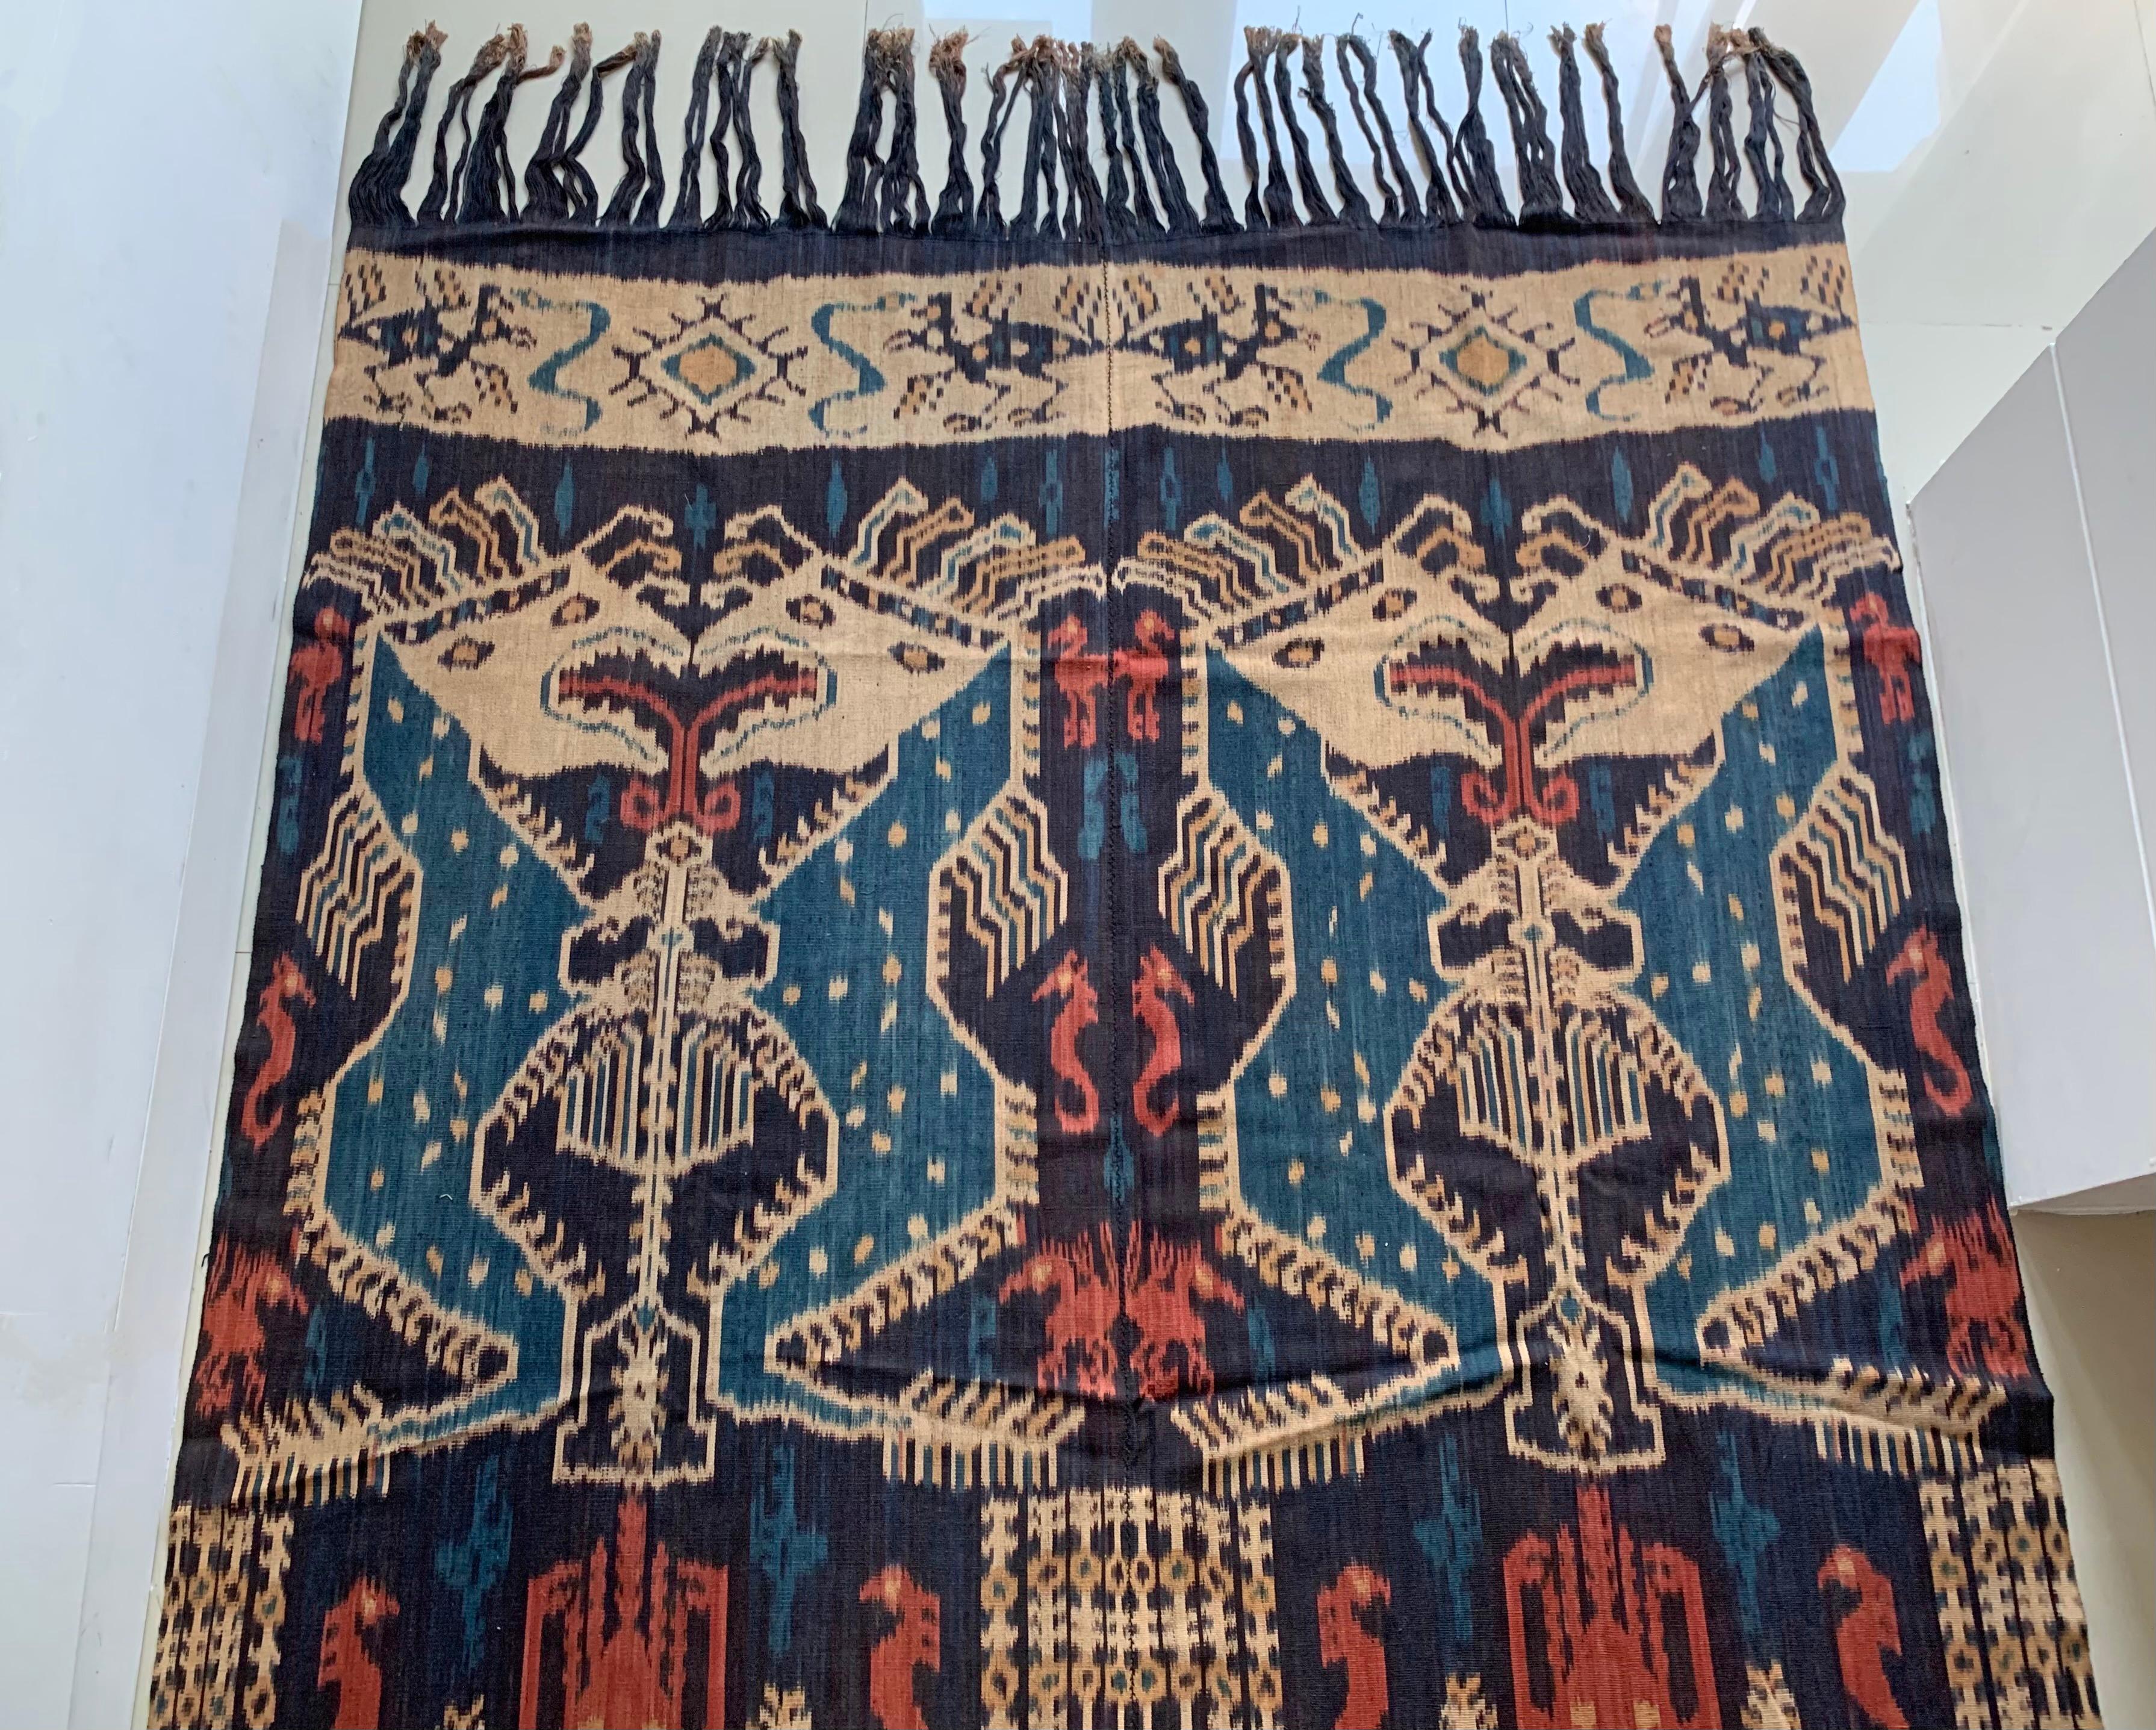 indonesian textile patterns